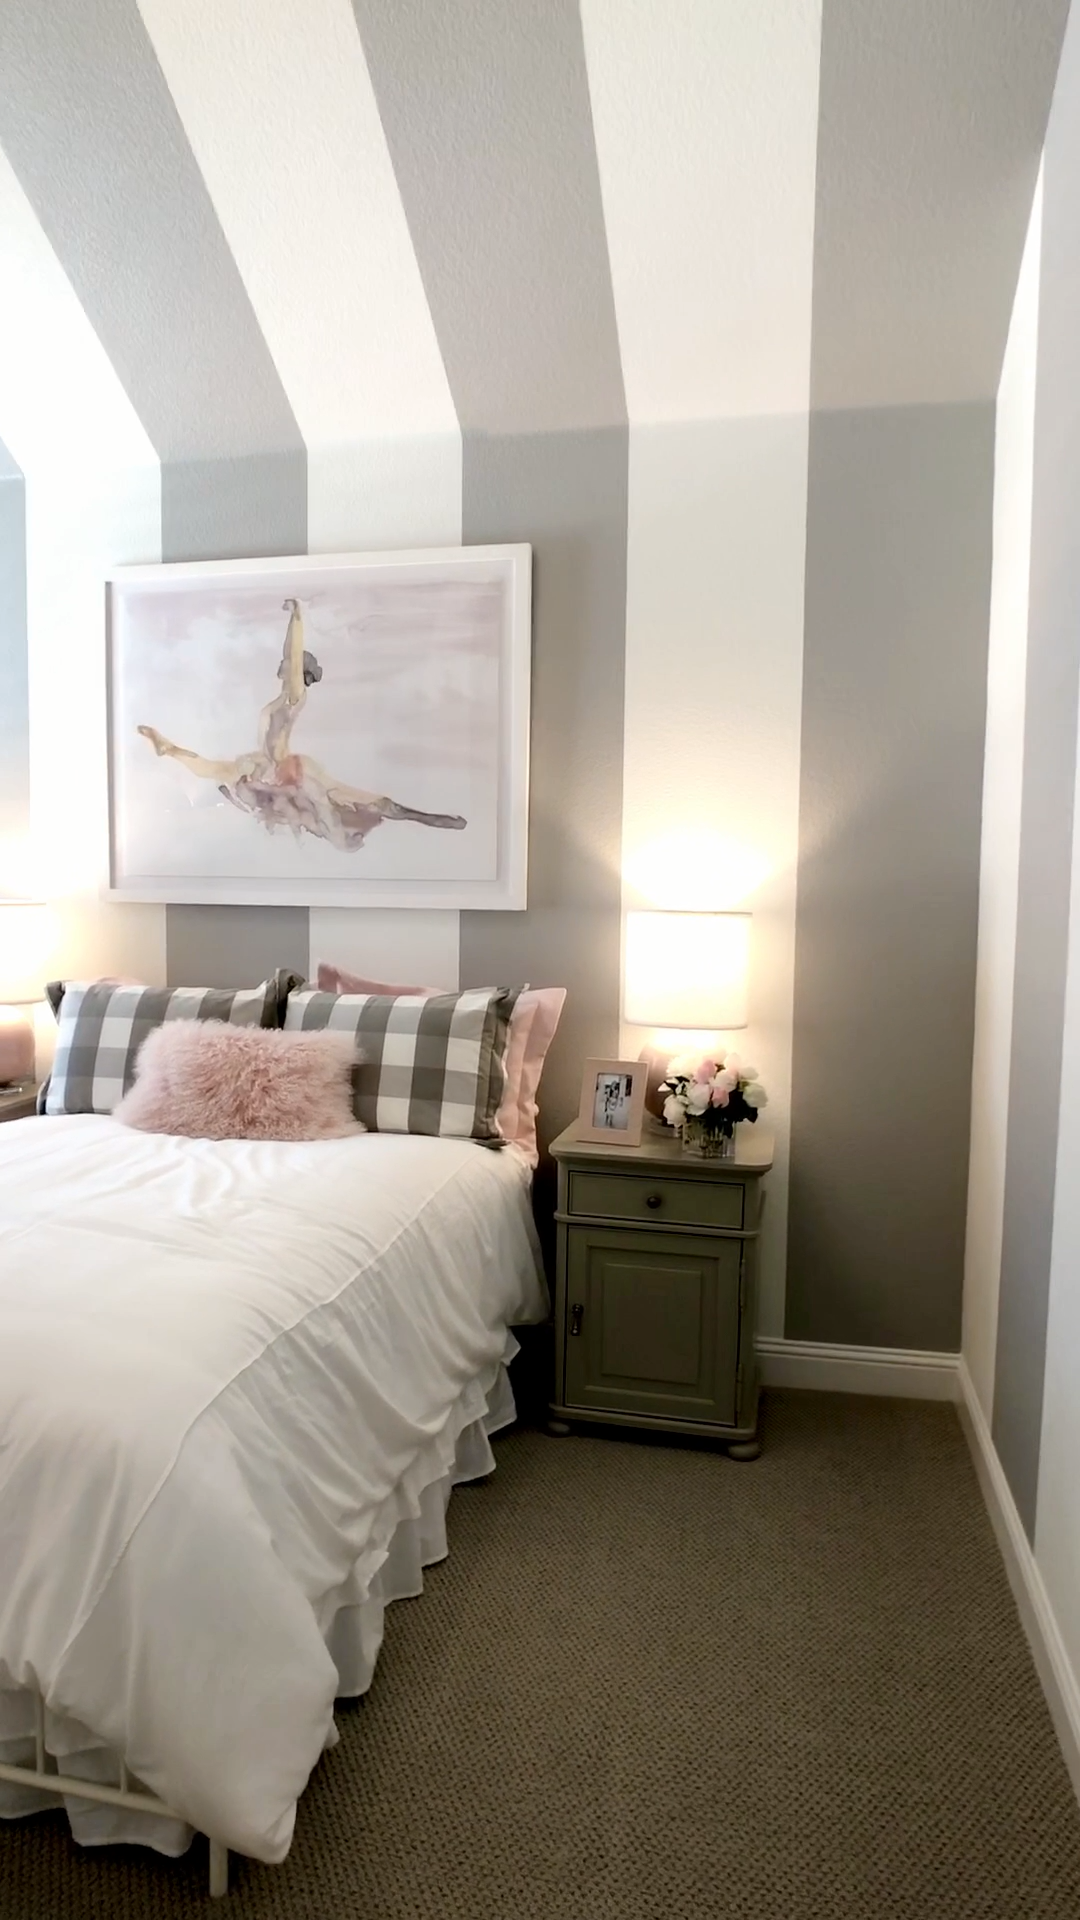 Girls Ballerina Bedroom with Striped Walls - Girls Ballerina Bedroom with Striped Walls -   14 diy Cuarto mujer ideas